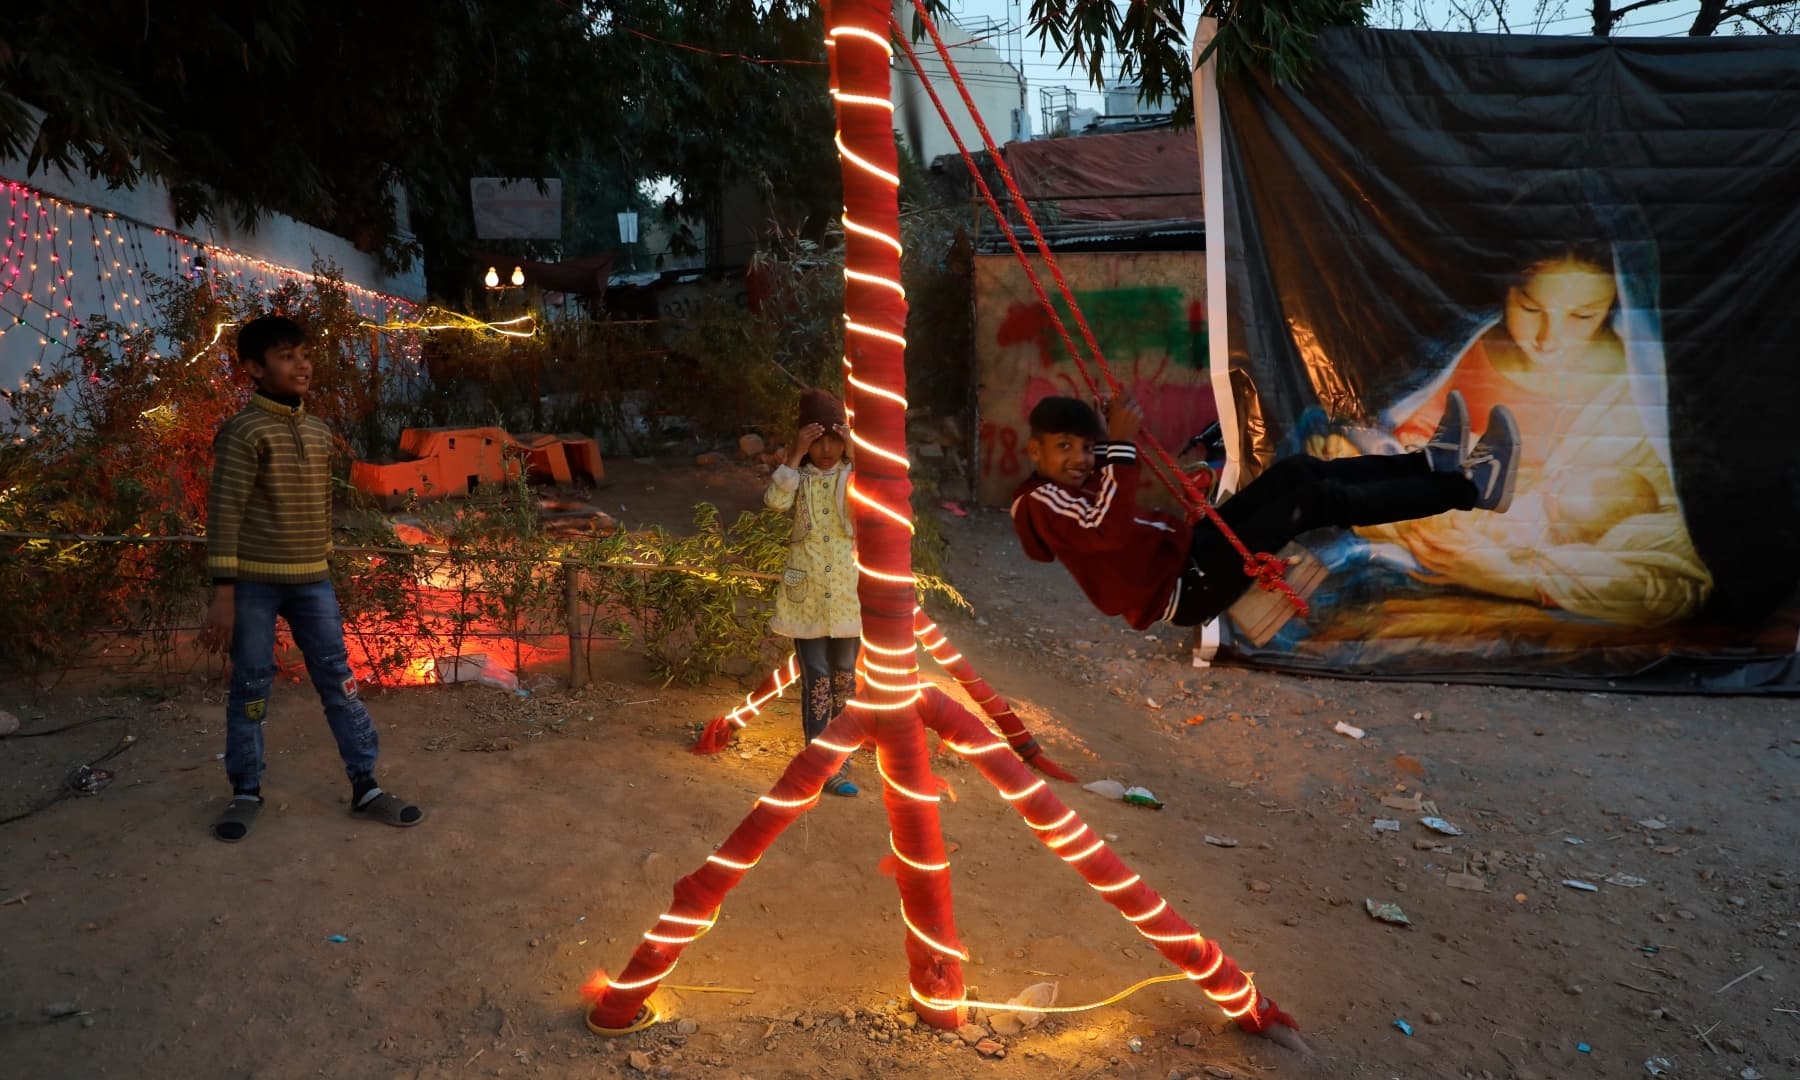 A boy plays on a swing during Christmas celebrations at a neighbourhood in Islamabad on December 25, 2021. — AP